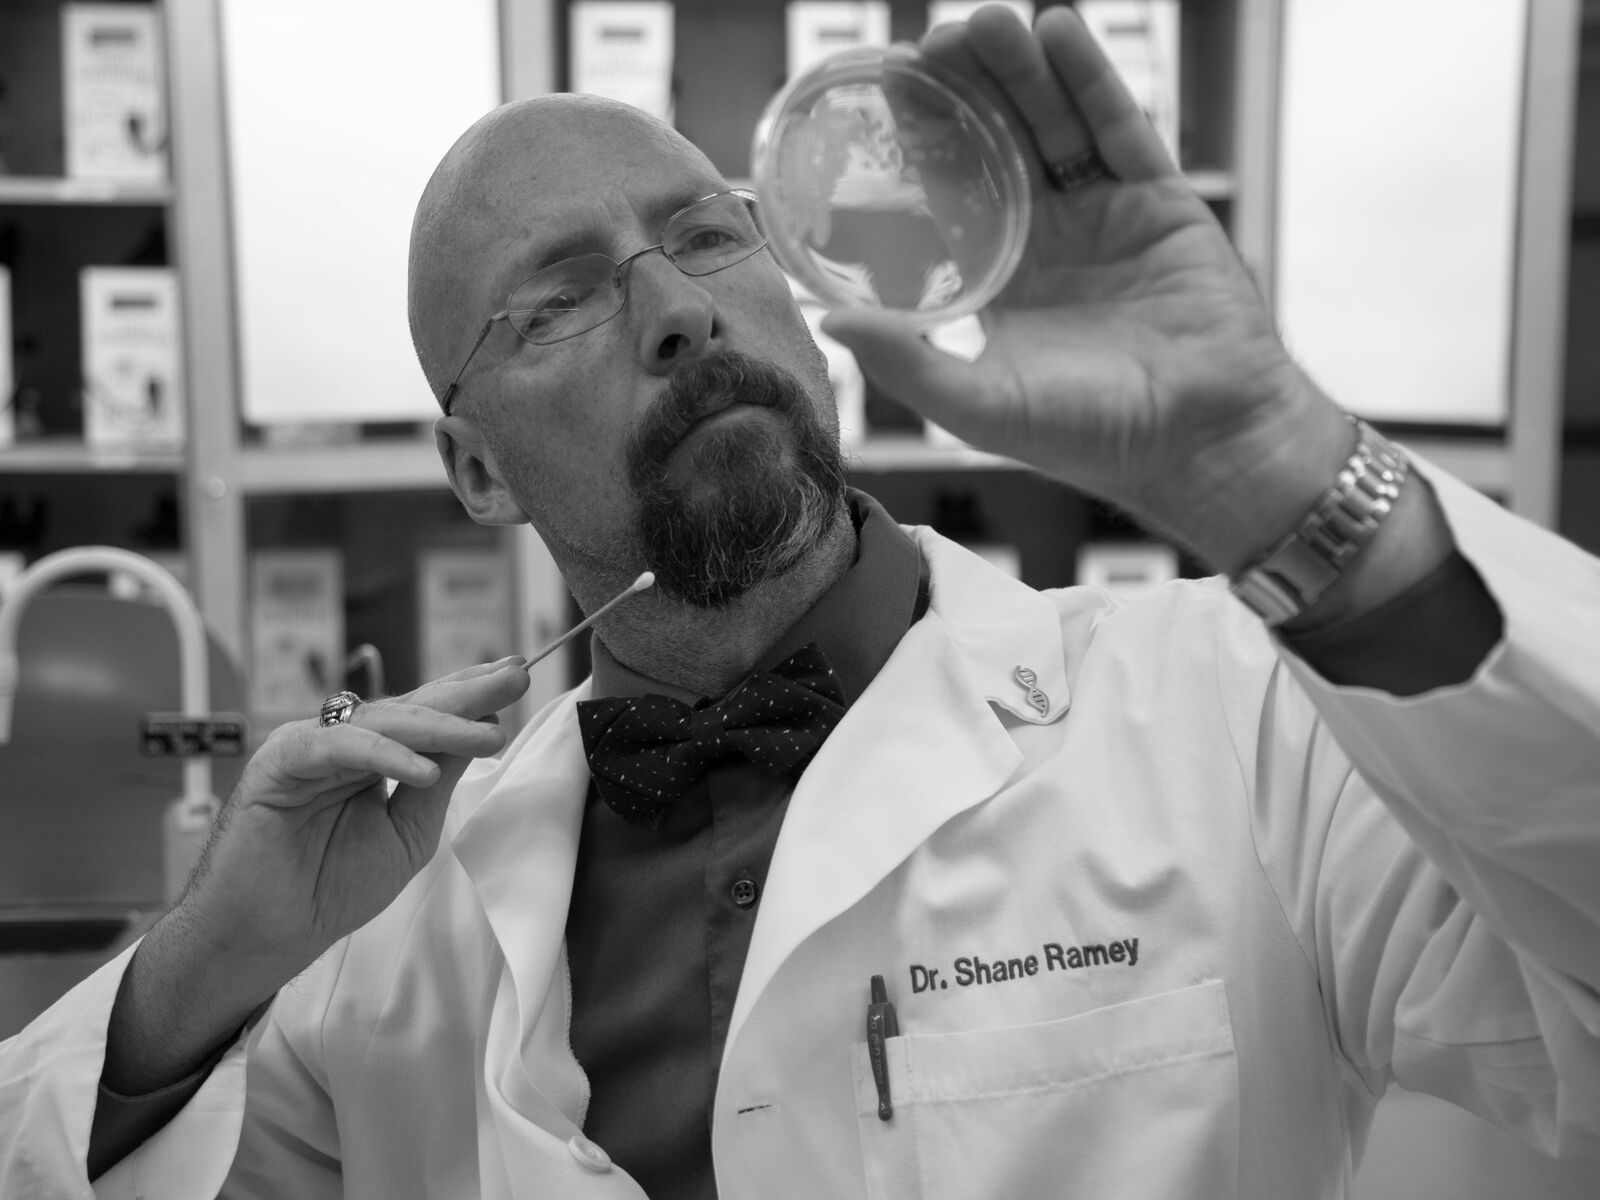 Dr. Ramey wearing a lab coat and bowtie, holding a Q-Tip and peering into a glass dish. 